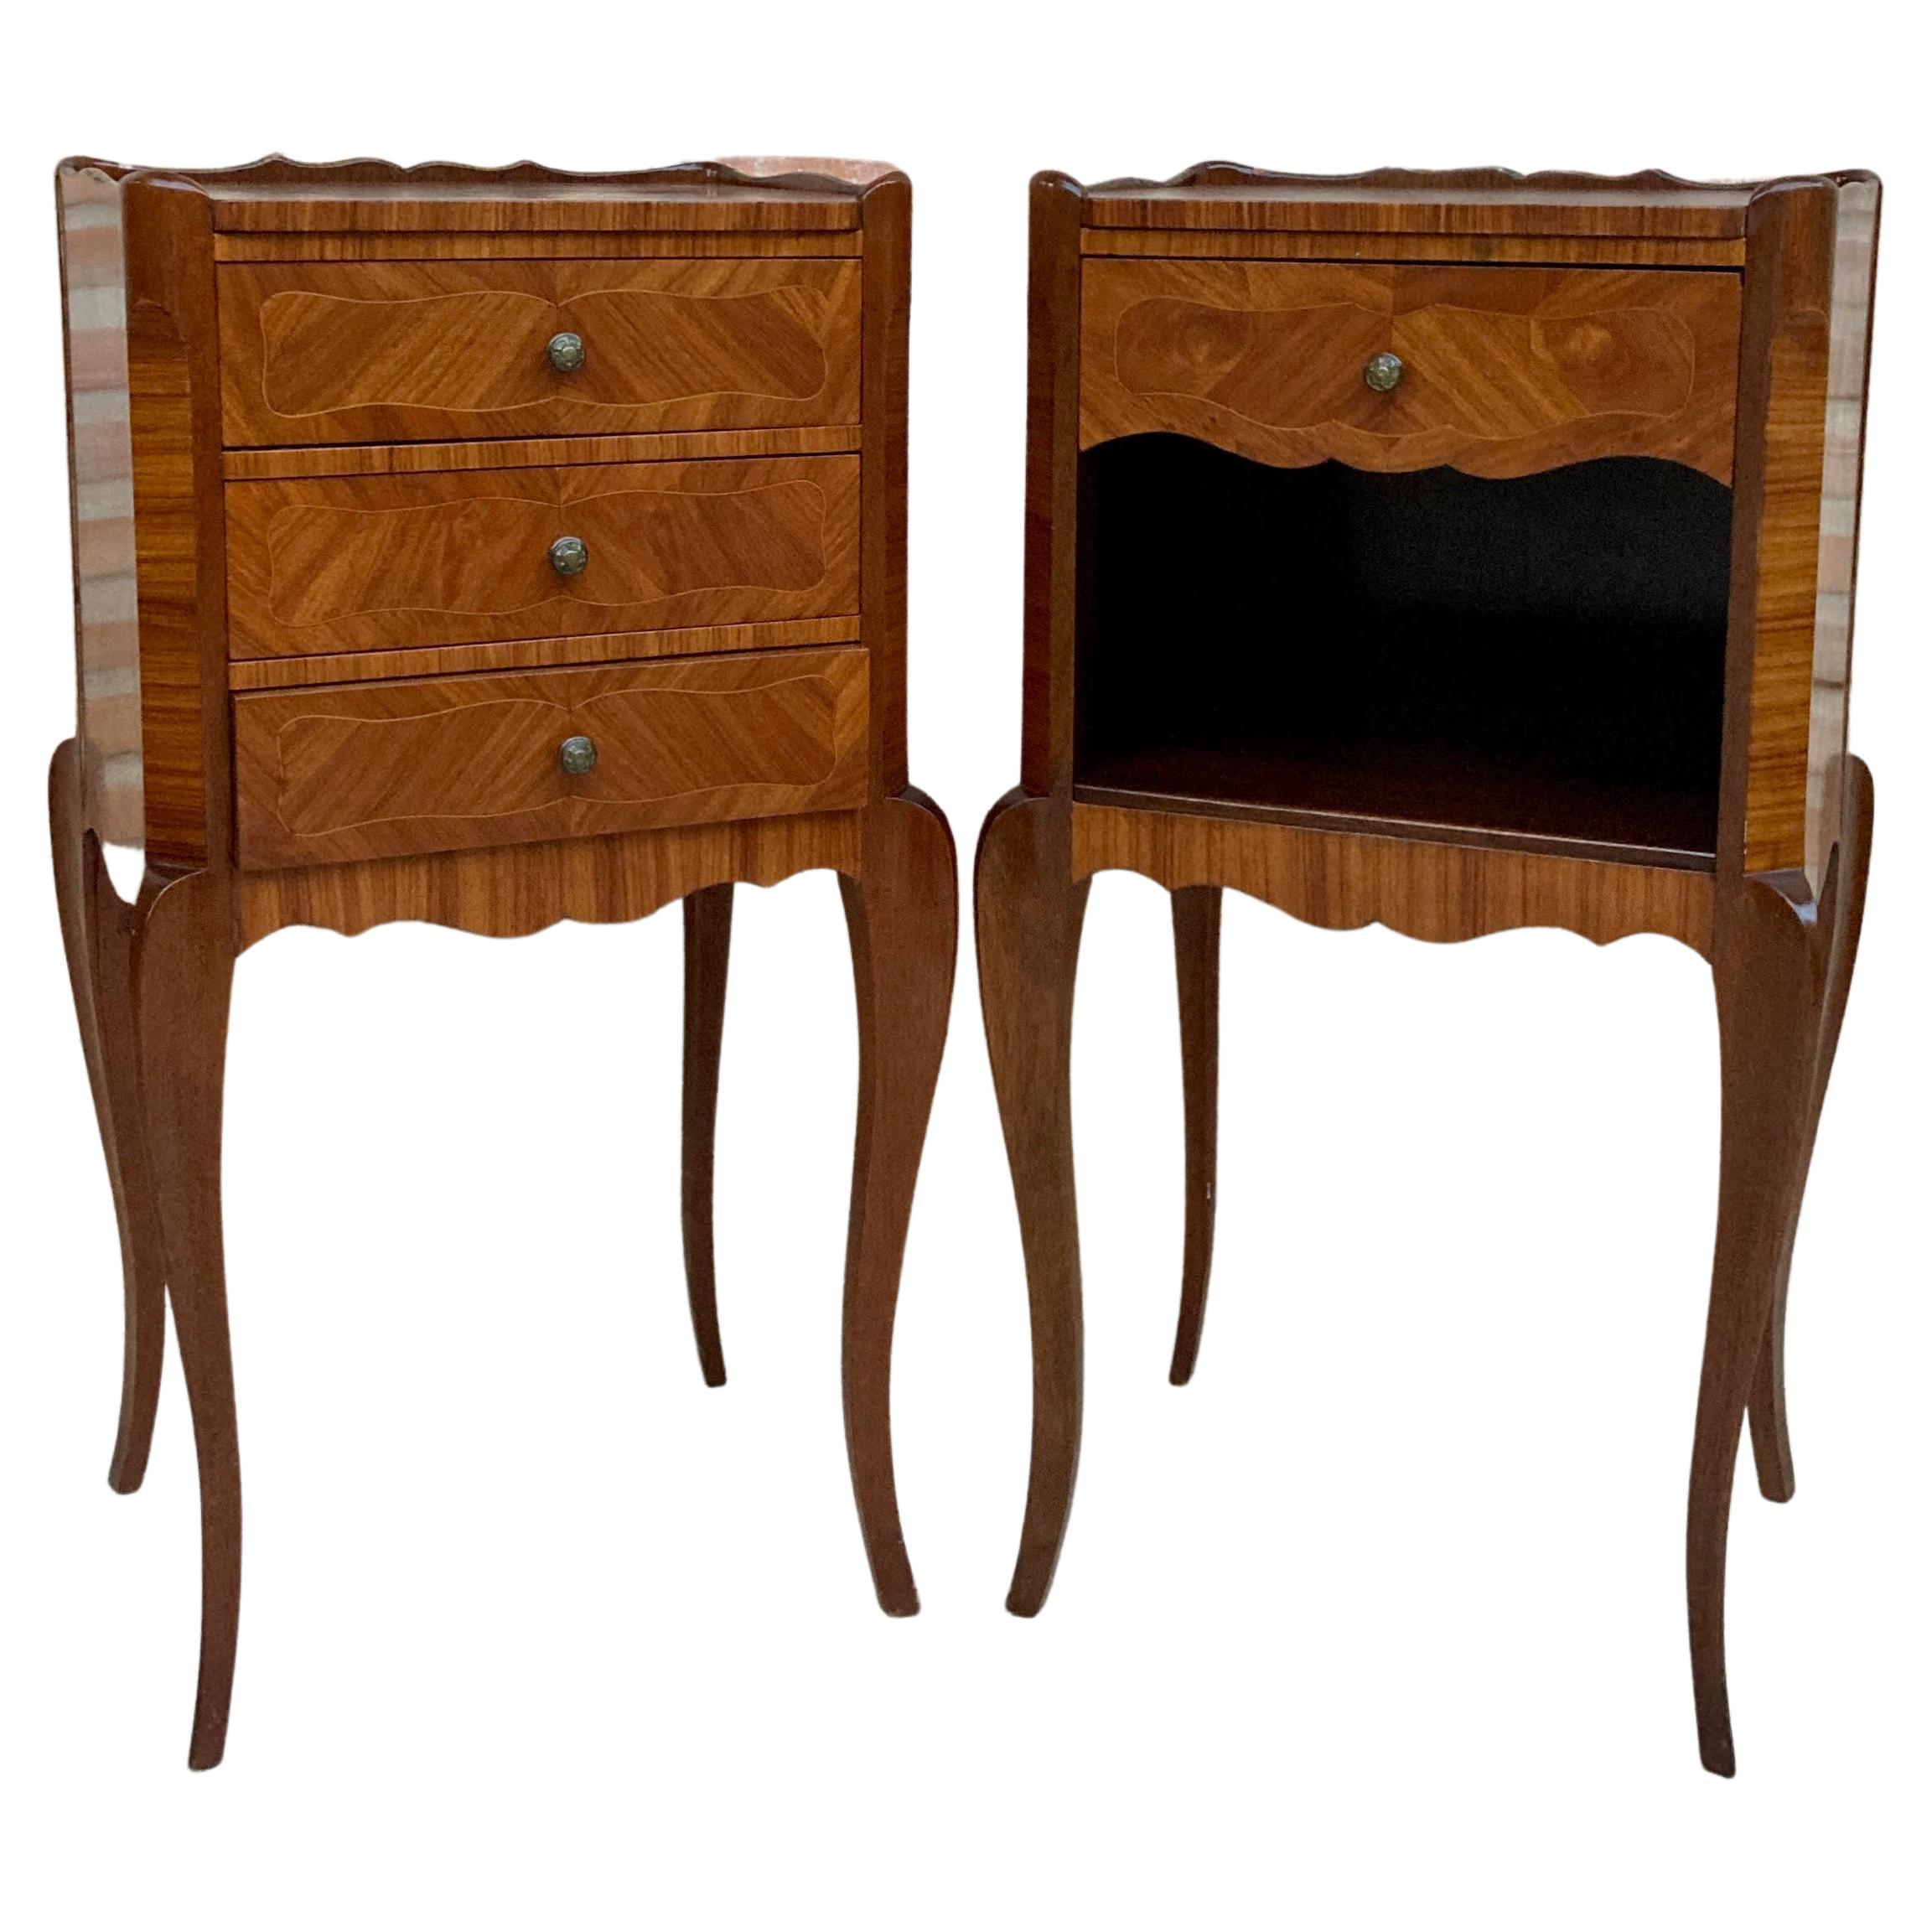 Early 20th Century French Marquetry And Iron Hardware Bedside Tables Or Nightsta For Sale